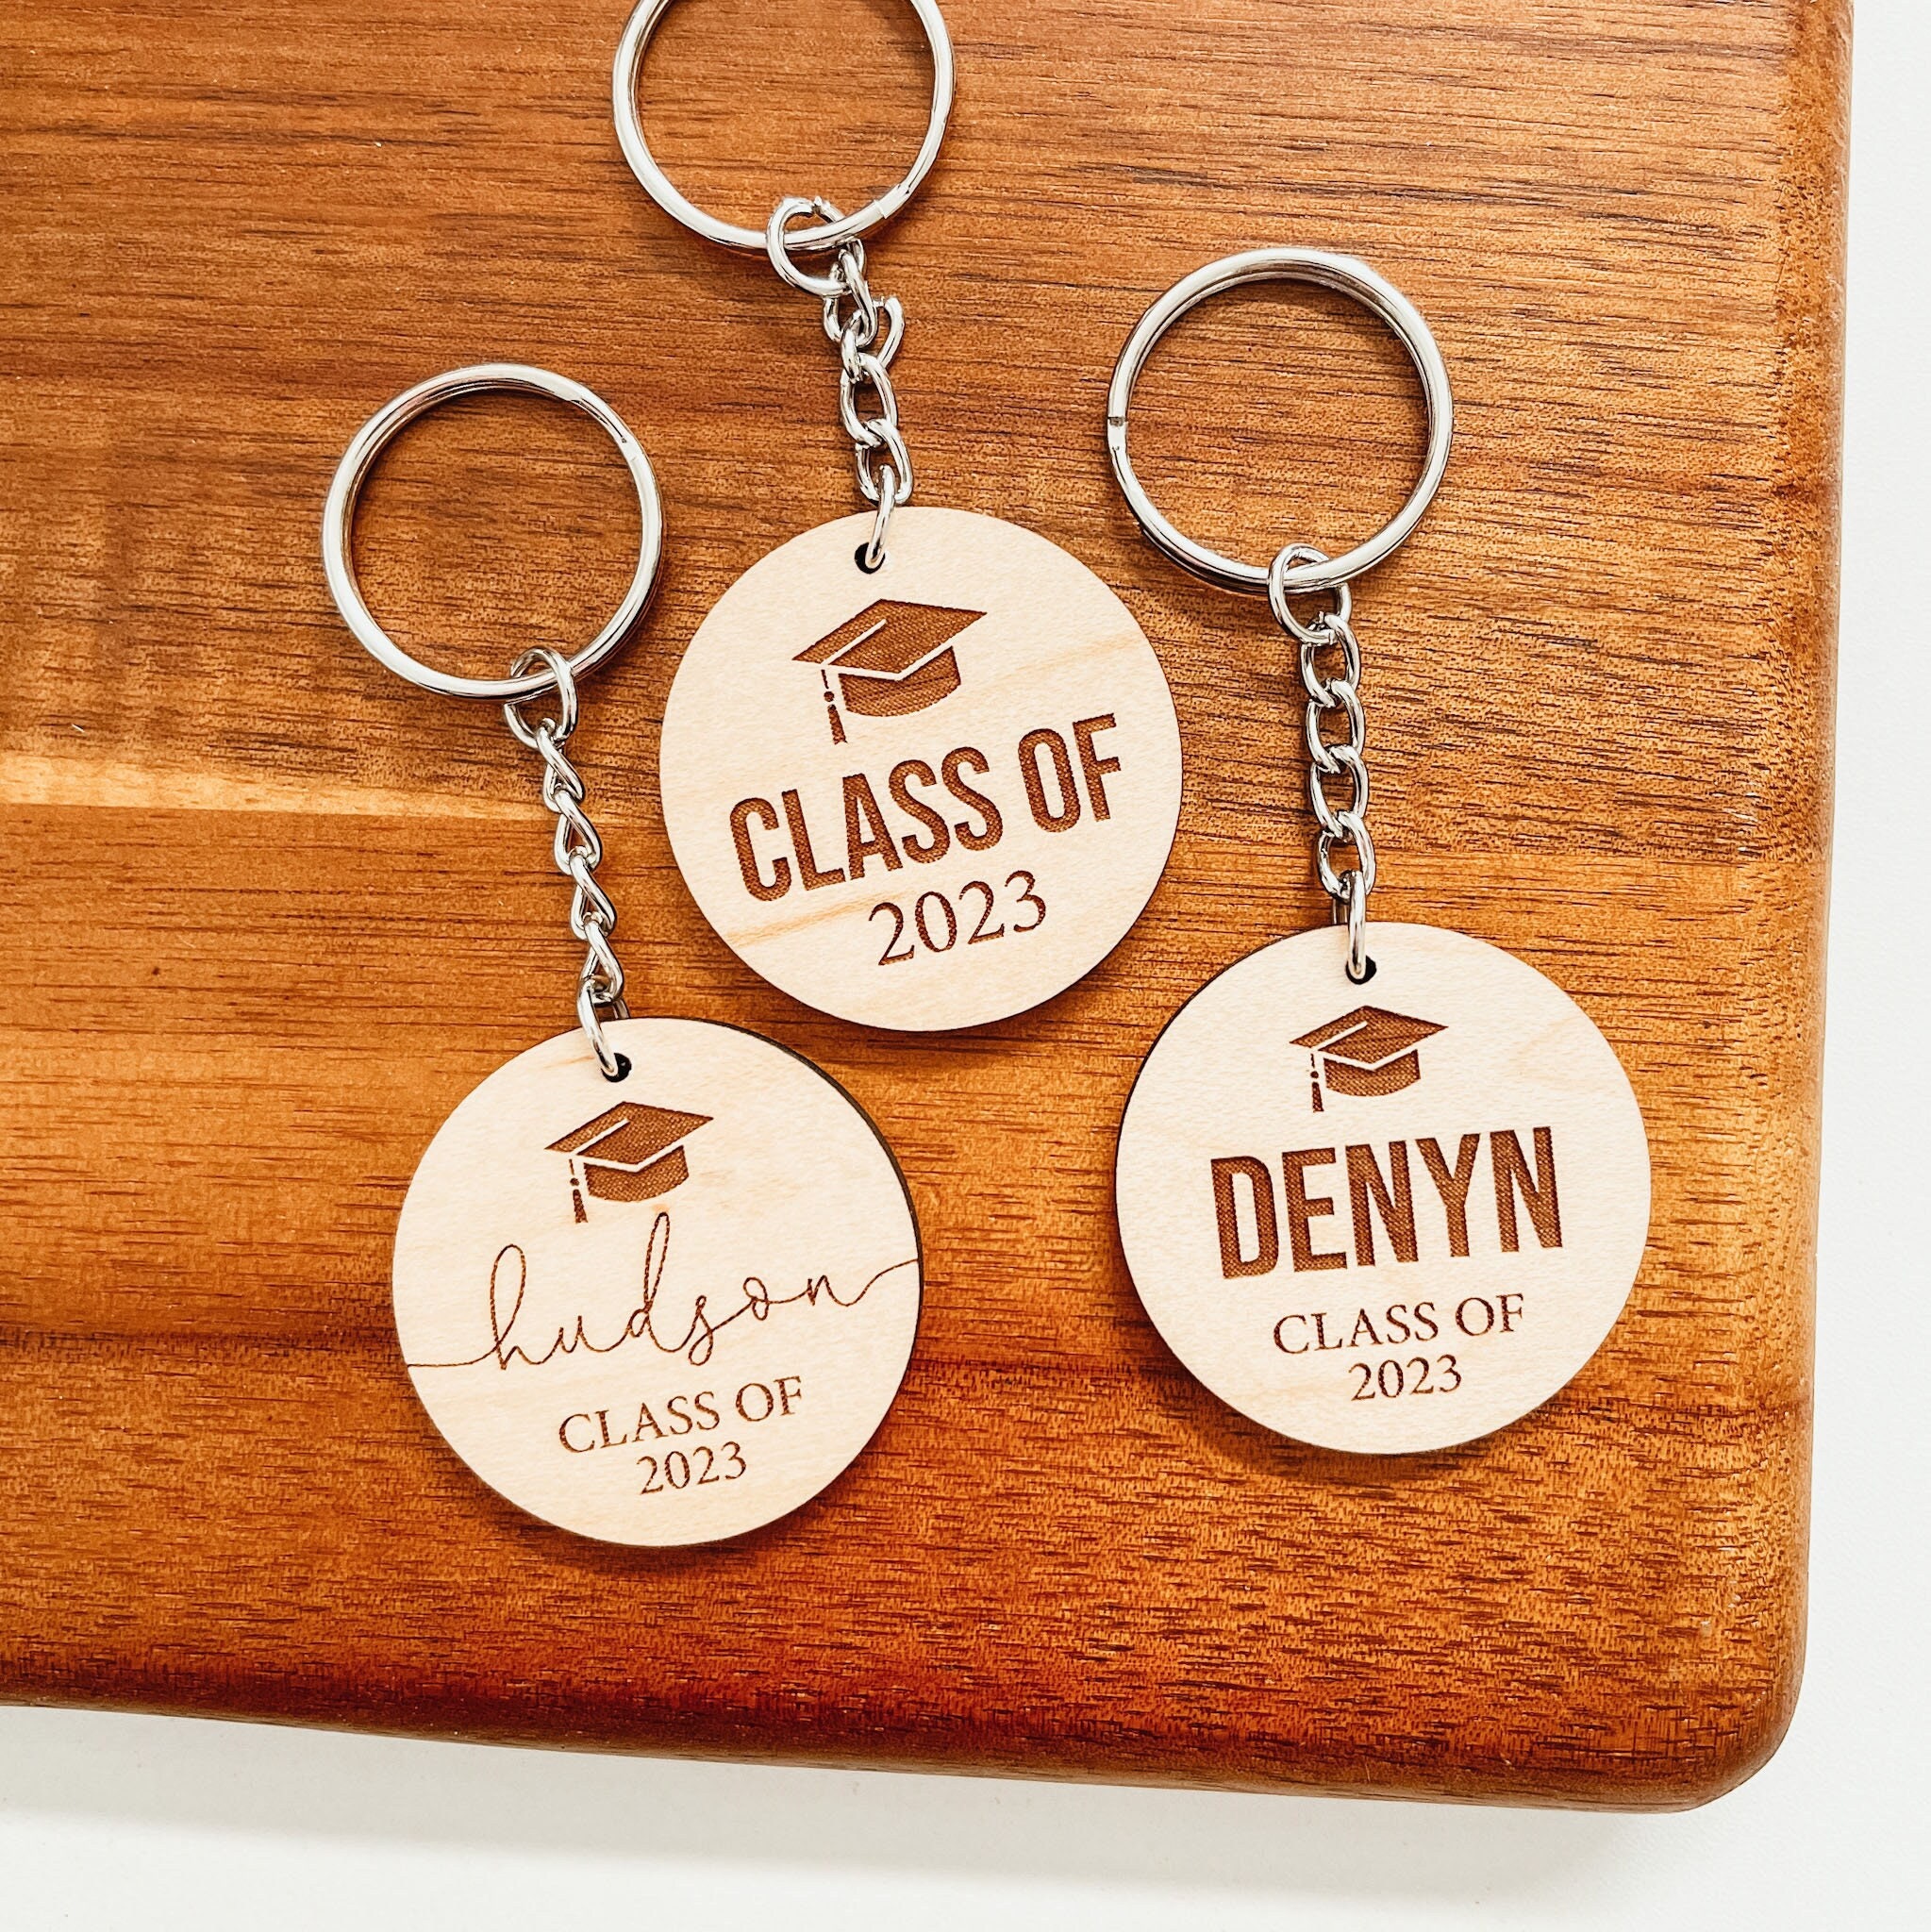 (12-Pack) Inspirational Keychains with Motivational Sayings - Wholesale  Bulk Keychains for Home, Gym and Office - Small Bulk Gifts for Men and  Women